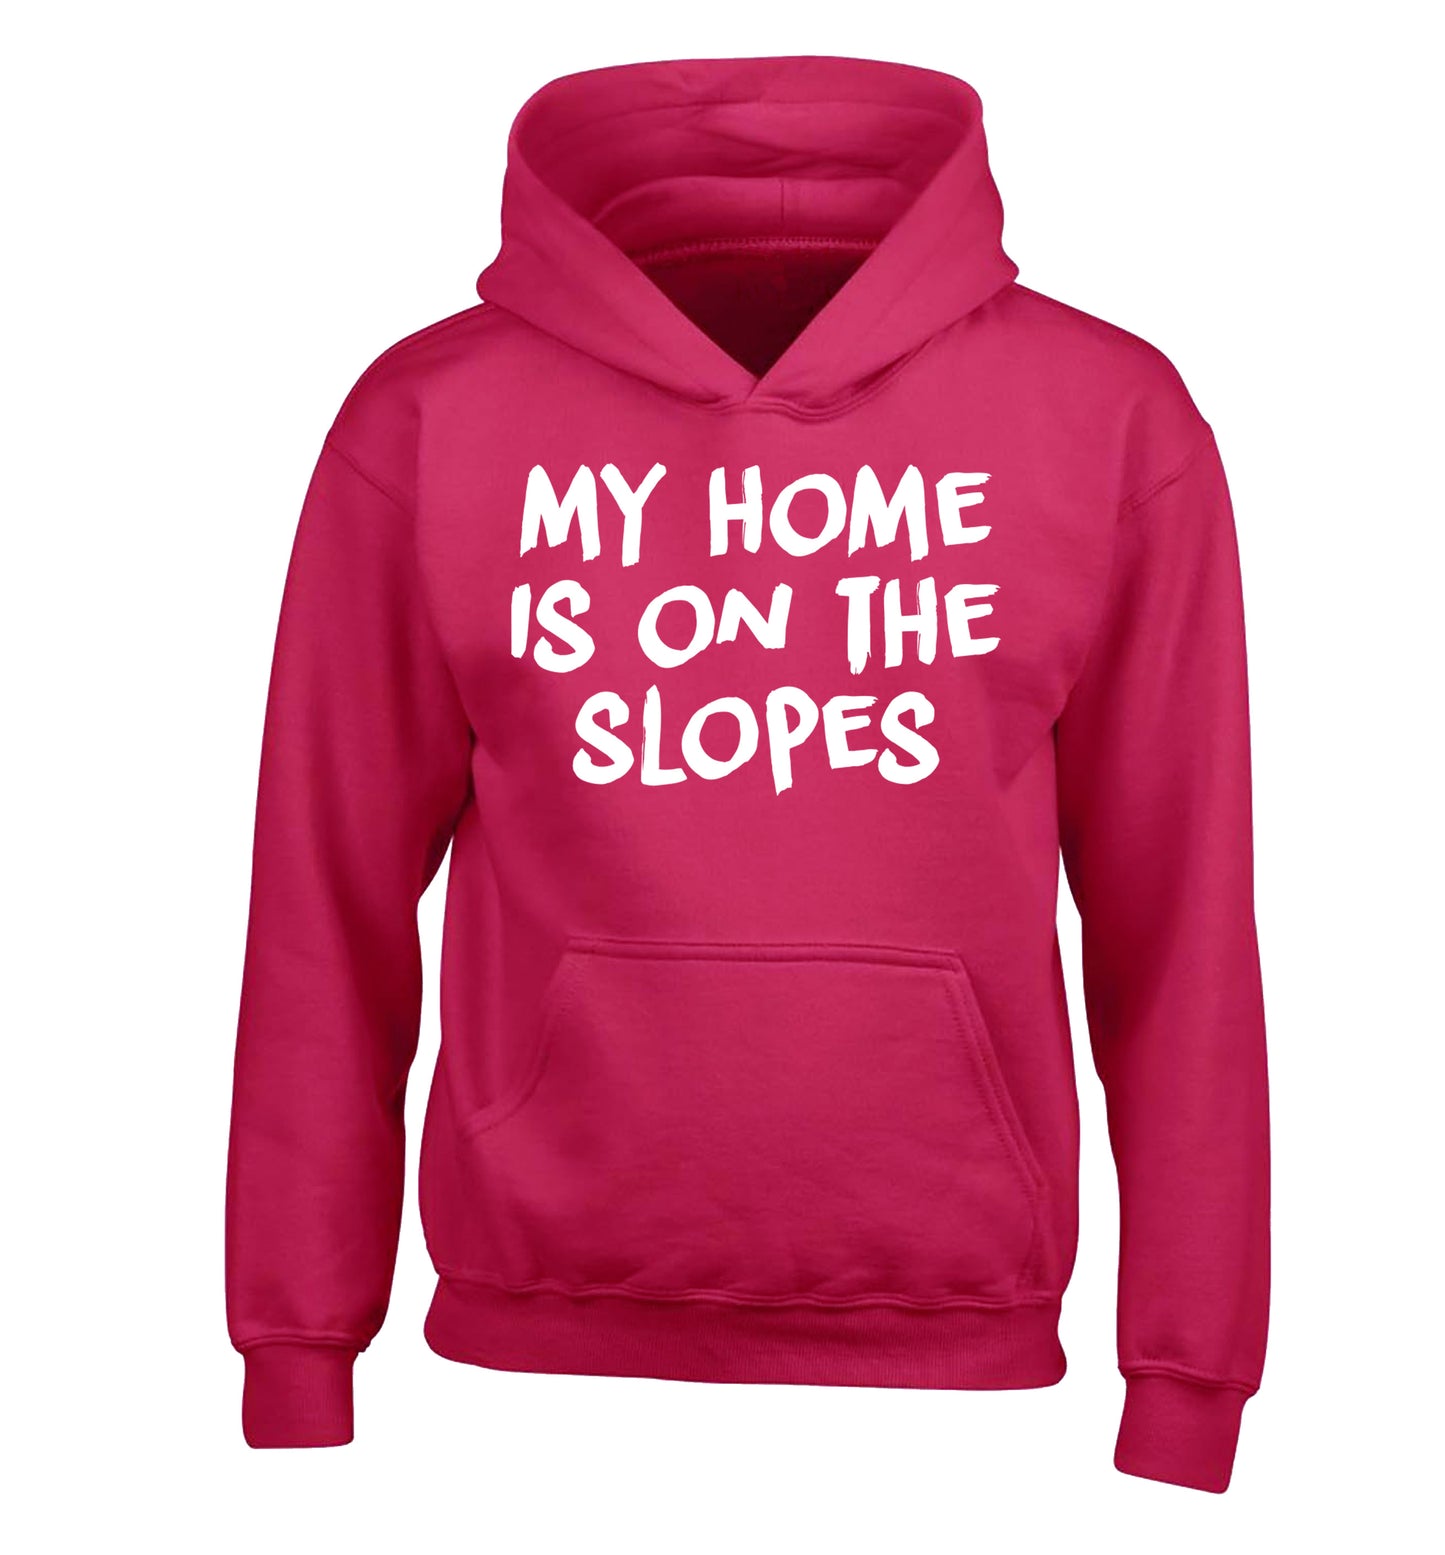 My home is on the slopes children's pink hoodie 12-14 Years